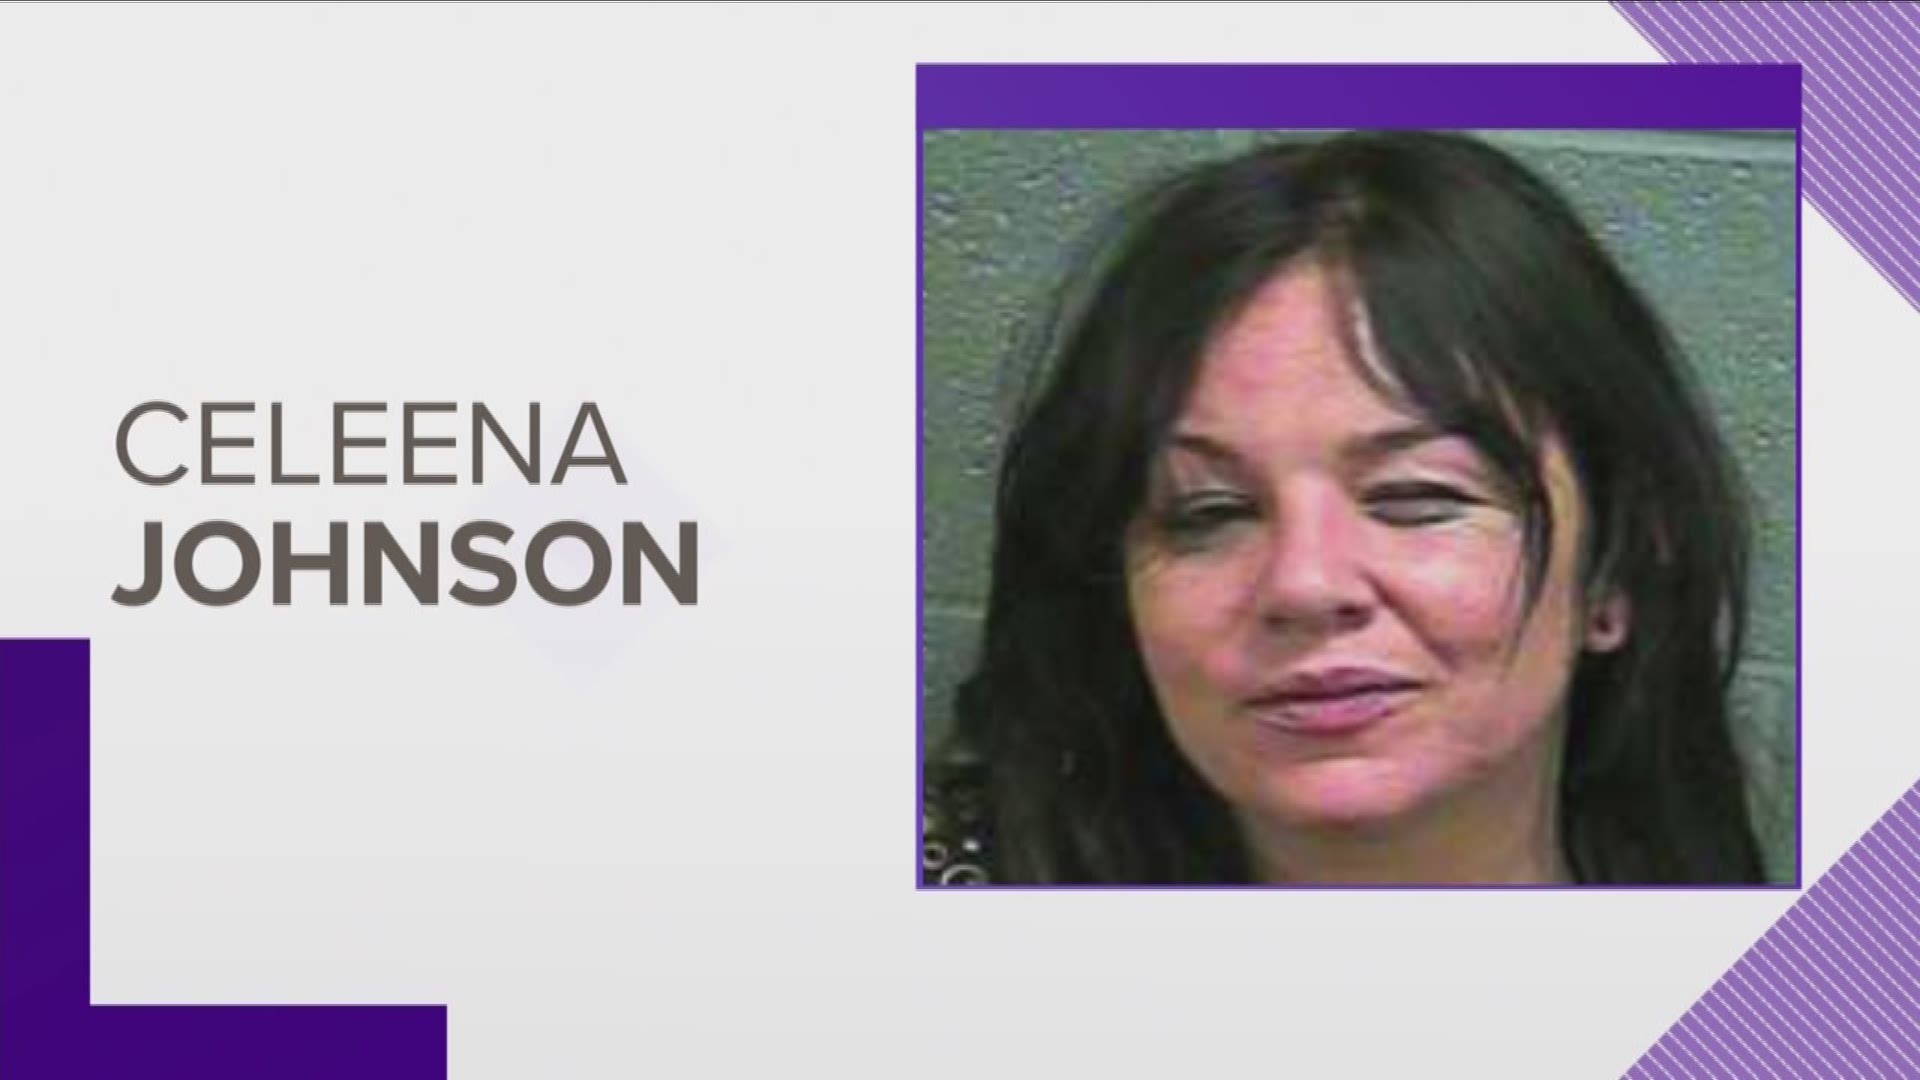 Police say a plane had to divert to Oklahoma city after a Knoxville woman on board became "drunk and disorderly."